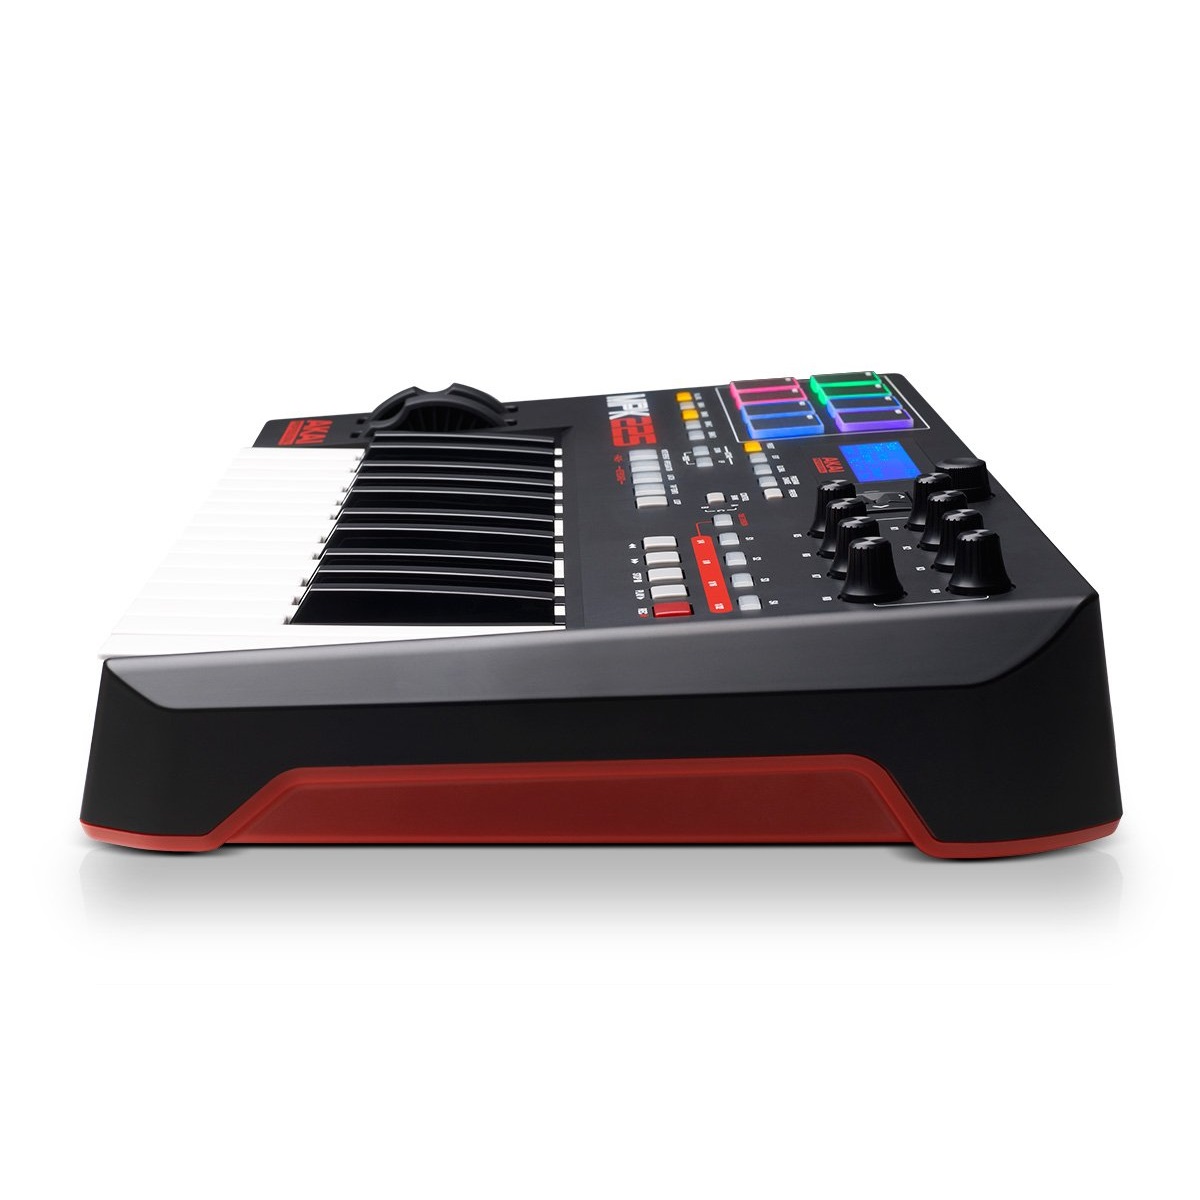 Akai Professional MPK 225 - Compact Keyboard Controller Online price in India